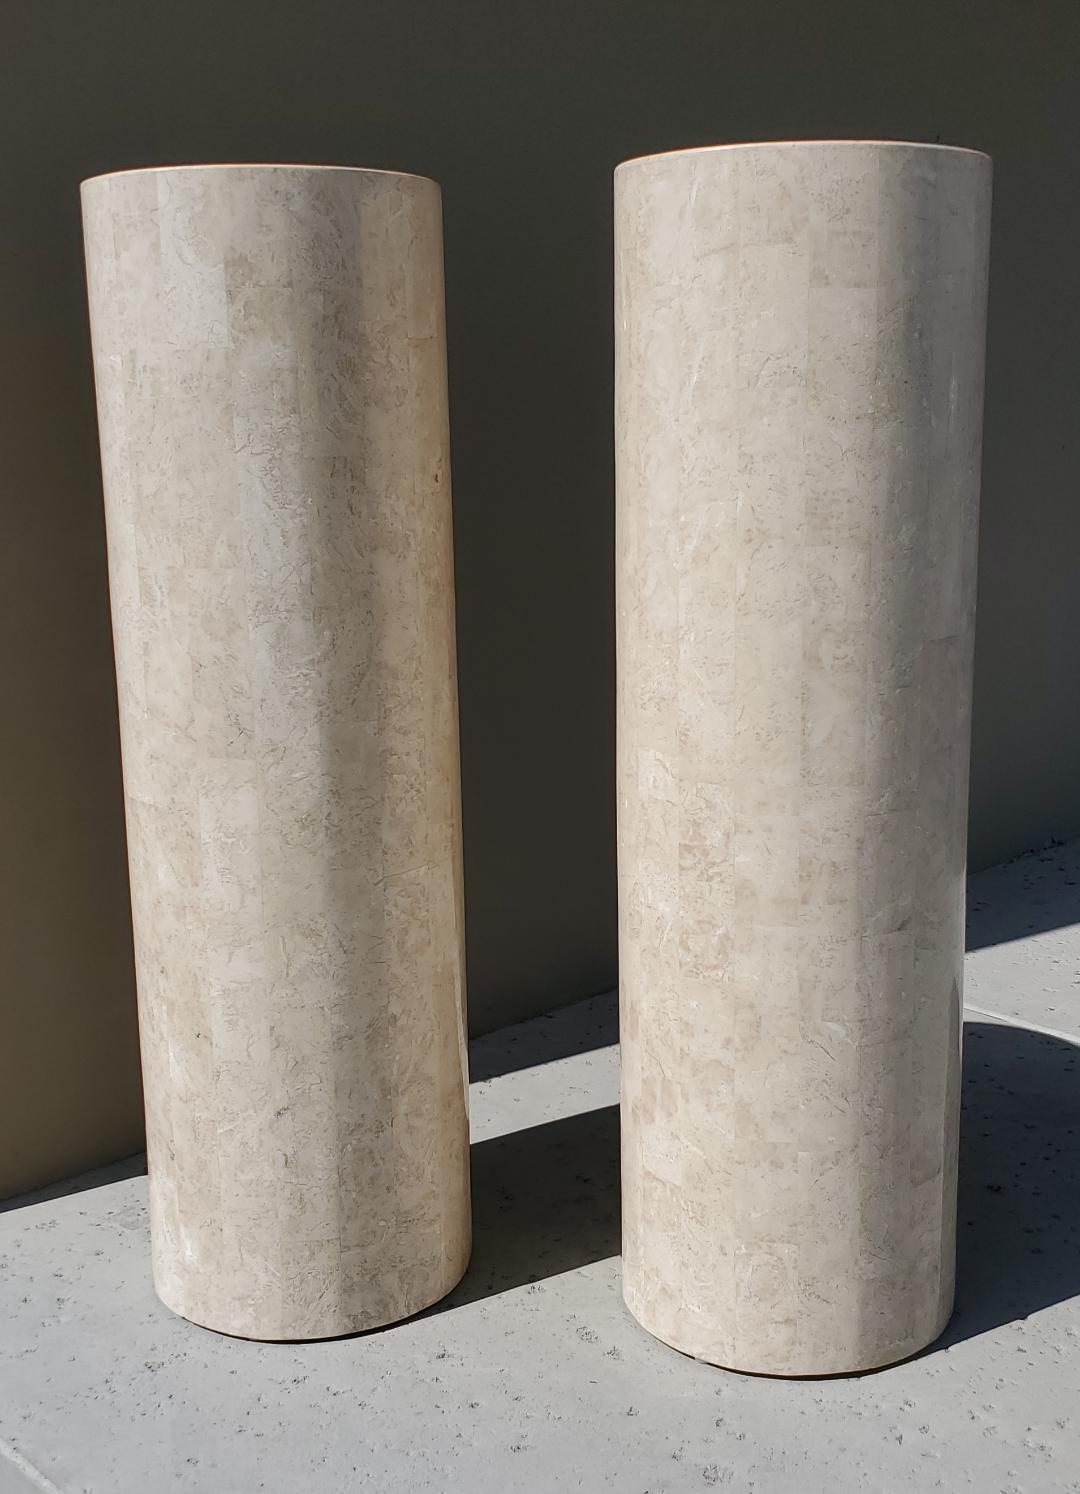 Marquis Collection of Beverly Hills, 1980s Round Tessellated Stone Pedestals 2 12